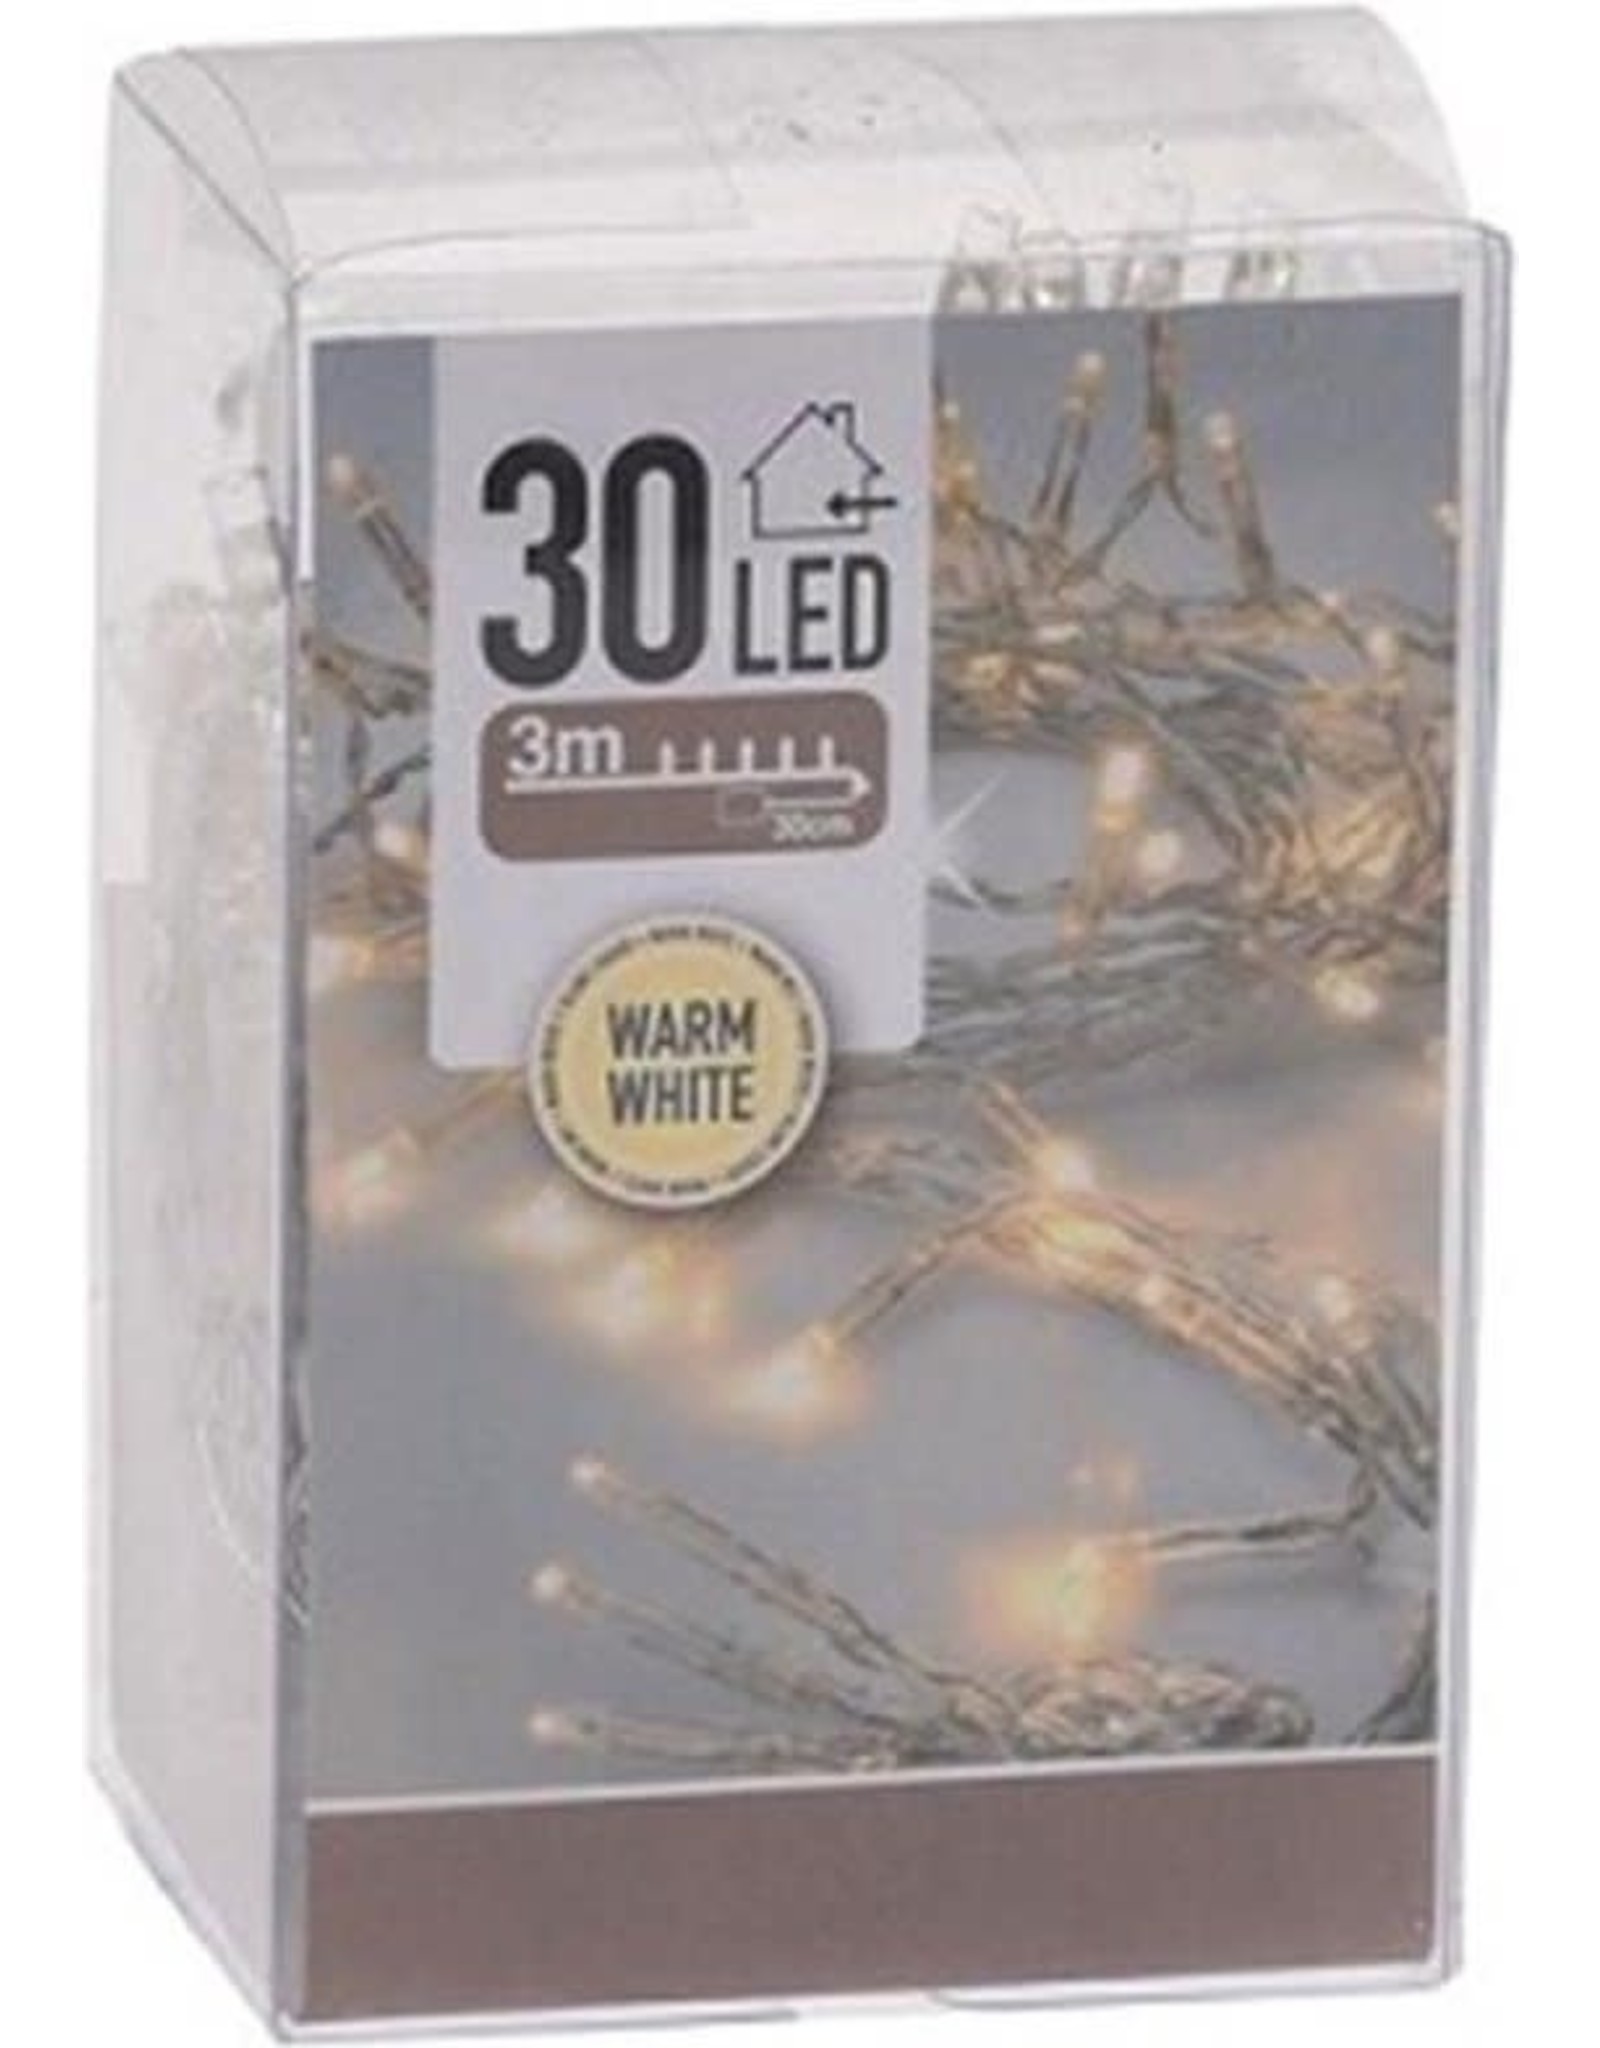 LED LEDverlichting 30 lamps warm wit met timer